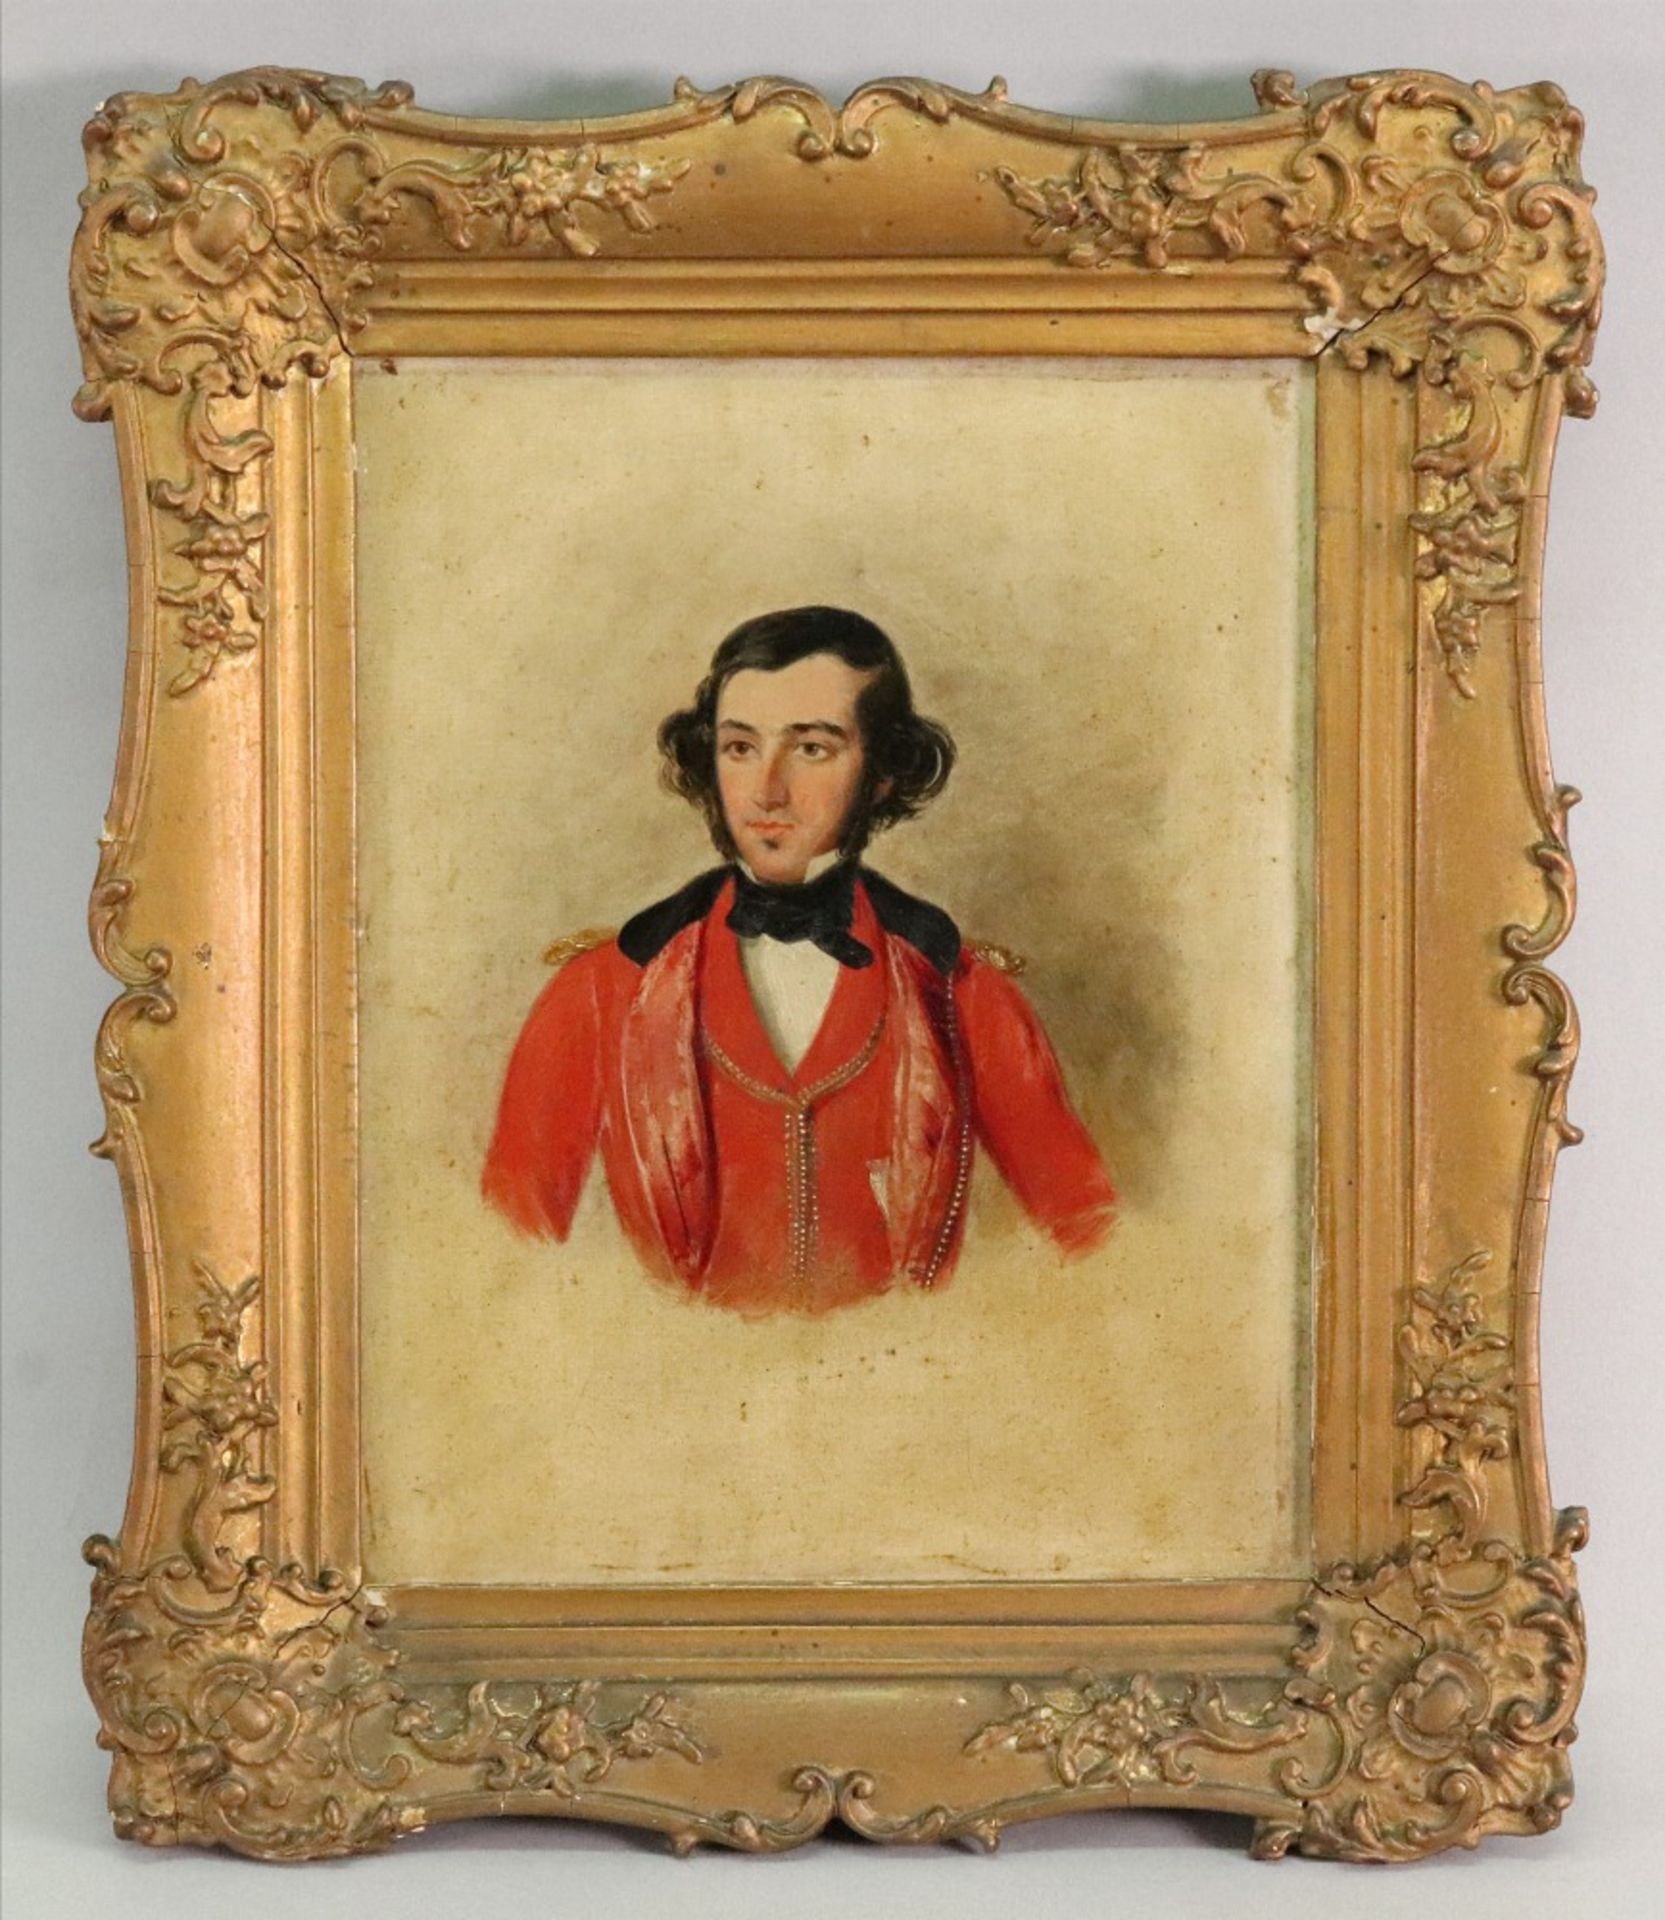 English School, first half 19th Century, Head and shoulder portrait of a member of the Yorke family, - Image 2 of 2